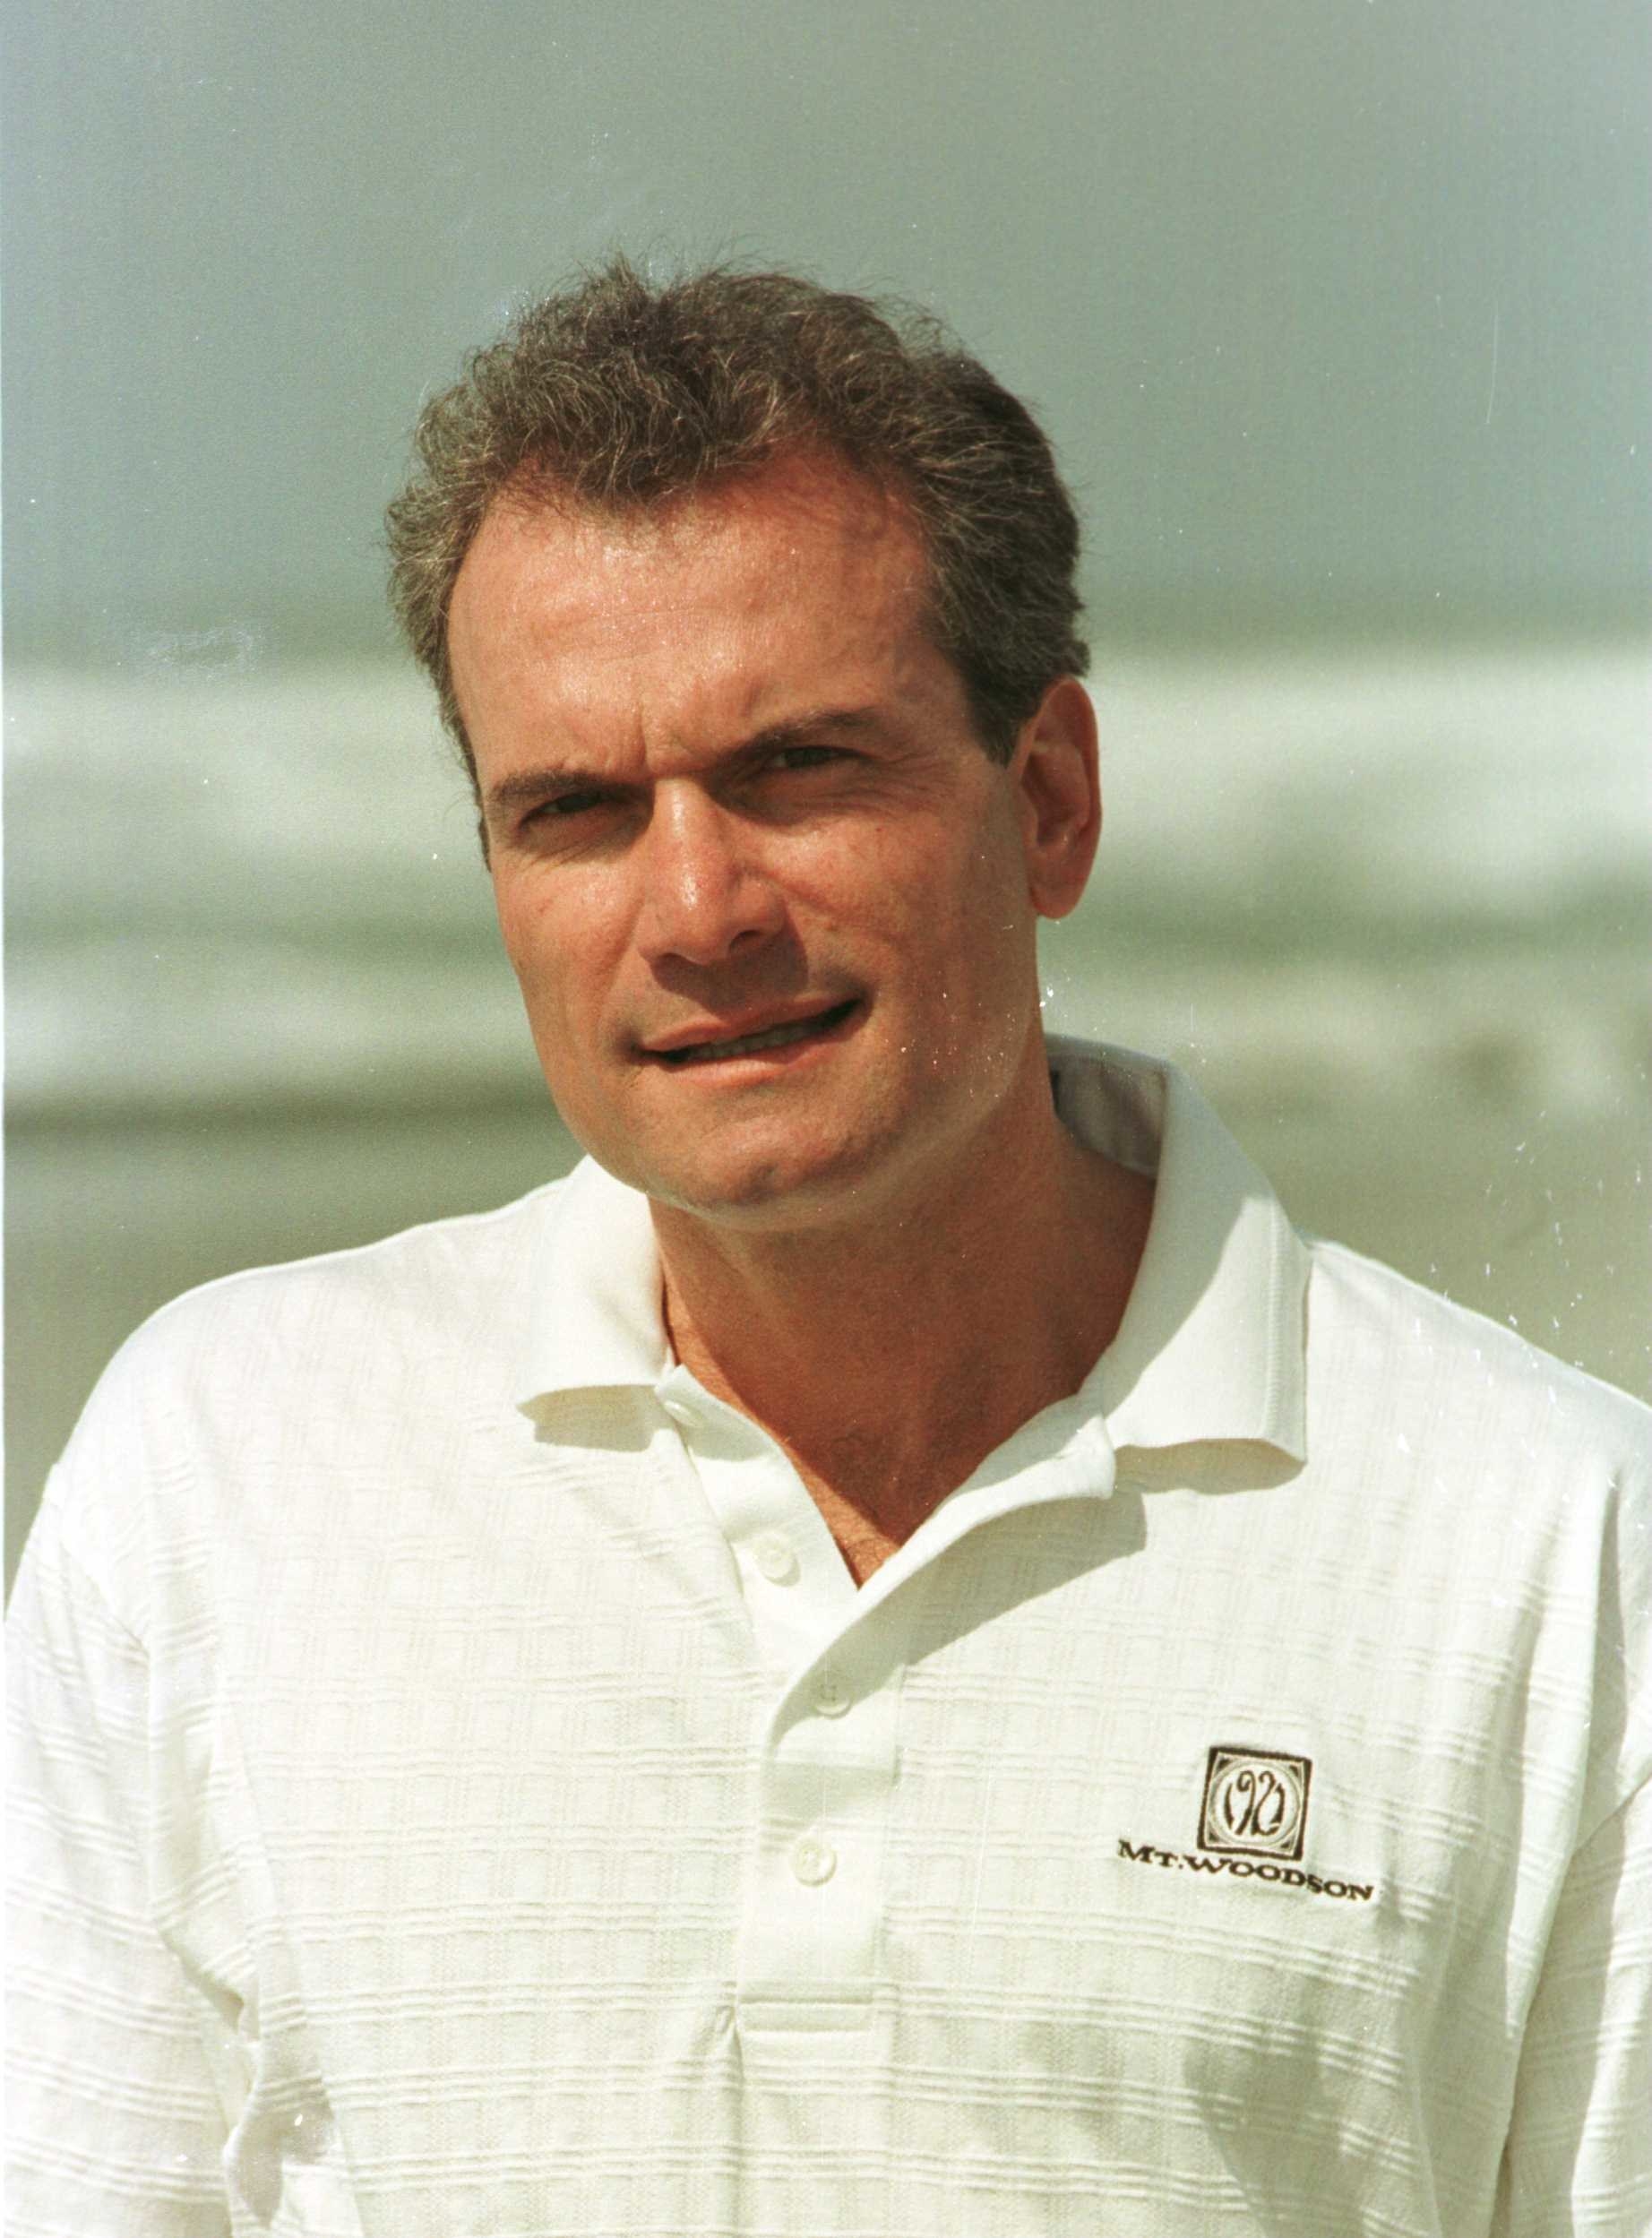 Rick Rockwell on a beach in Encinitas, California in March 2000